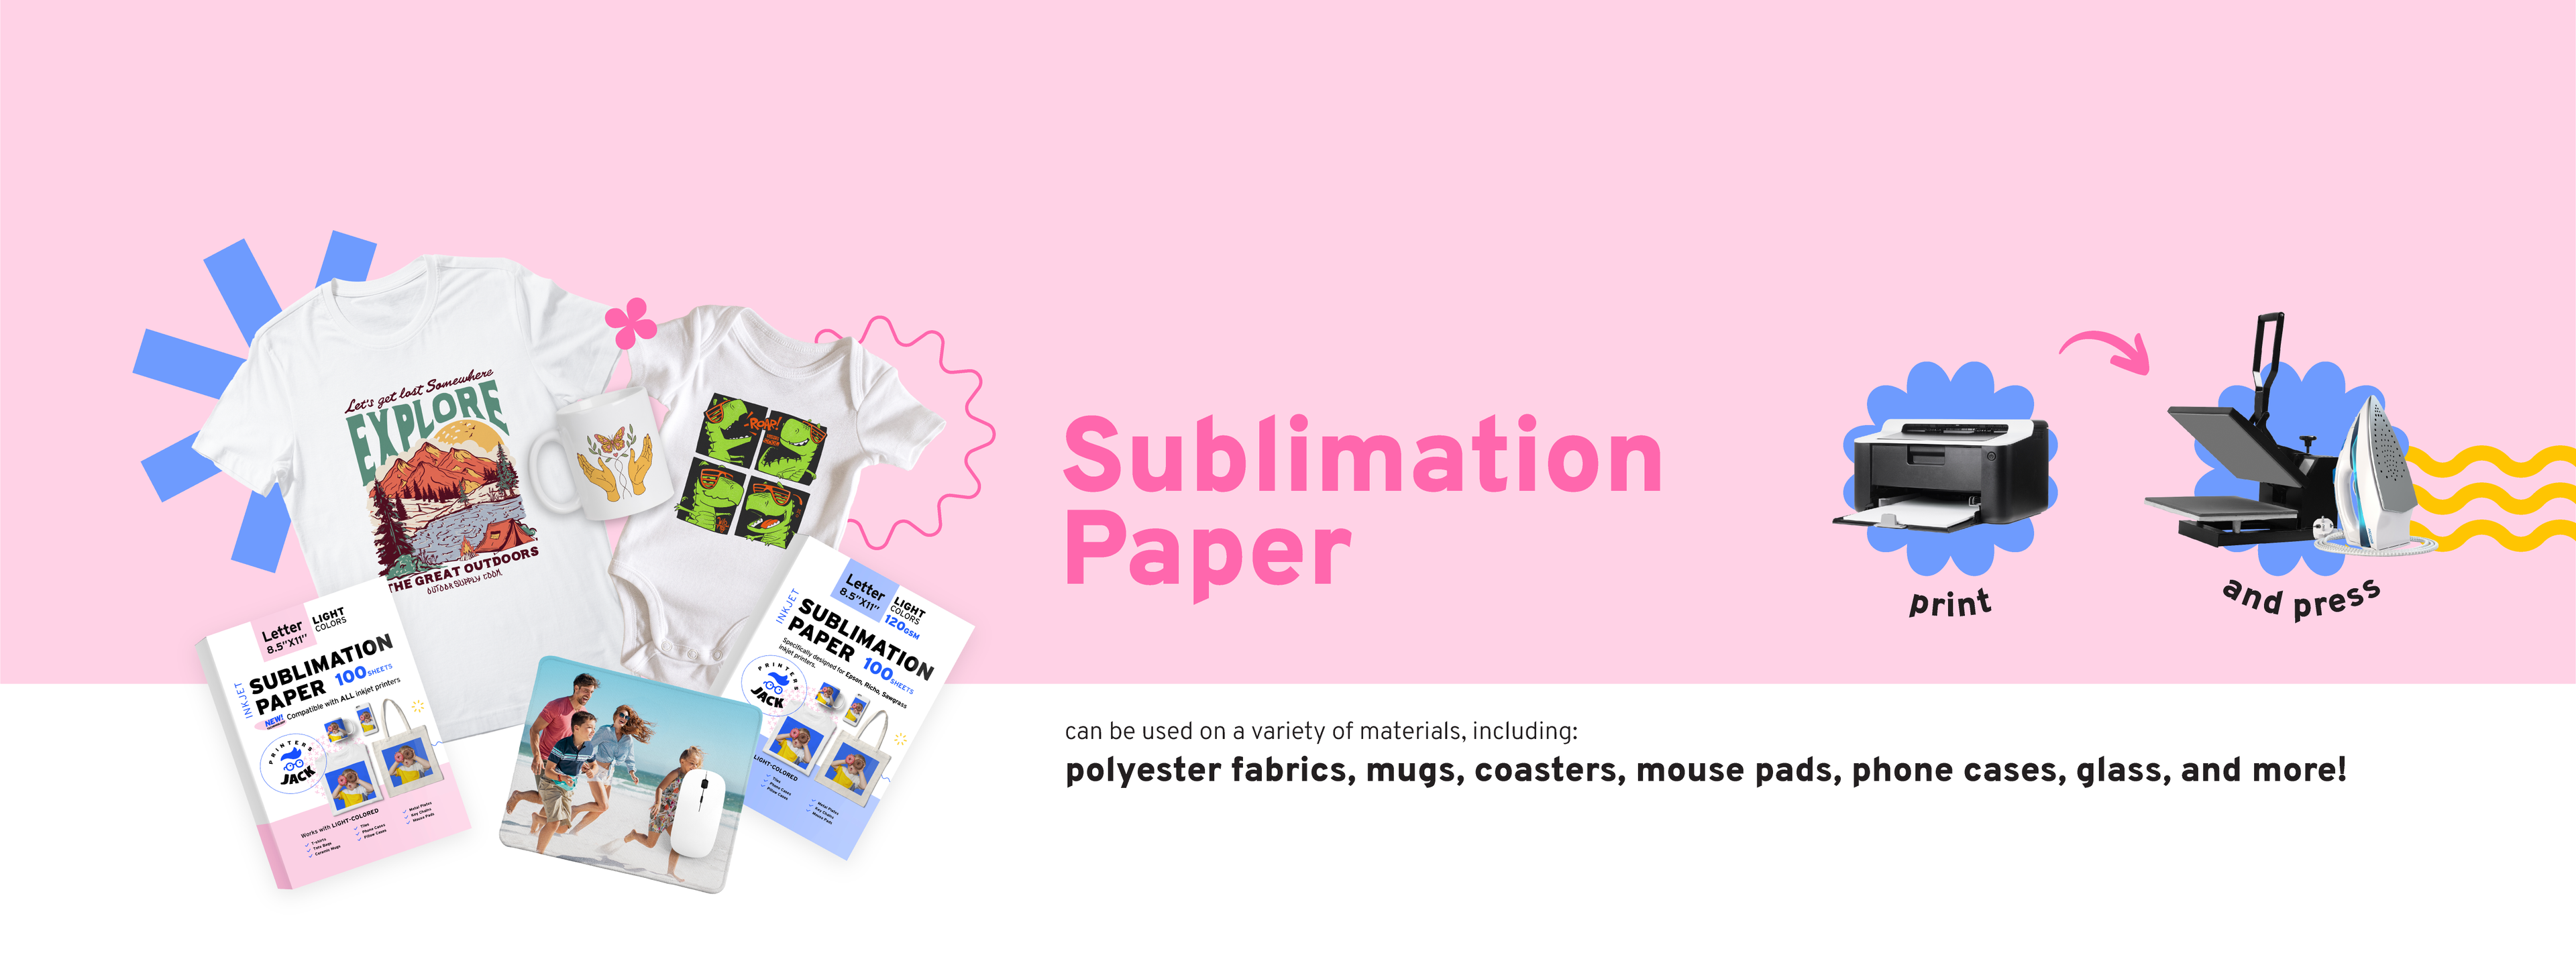 text: sublimation paper; image: sublimation paper and DIY projects made with sublimation paper 